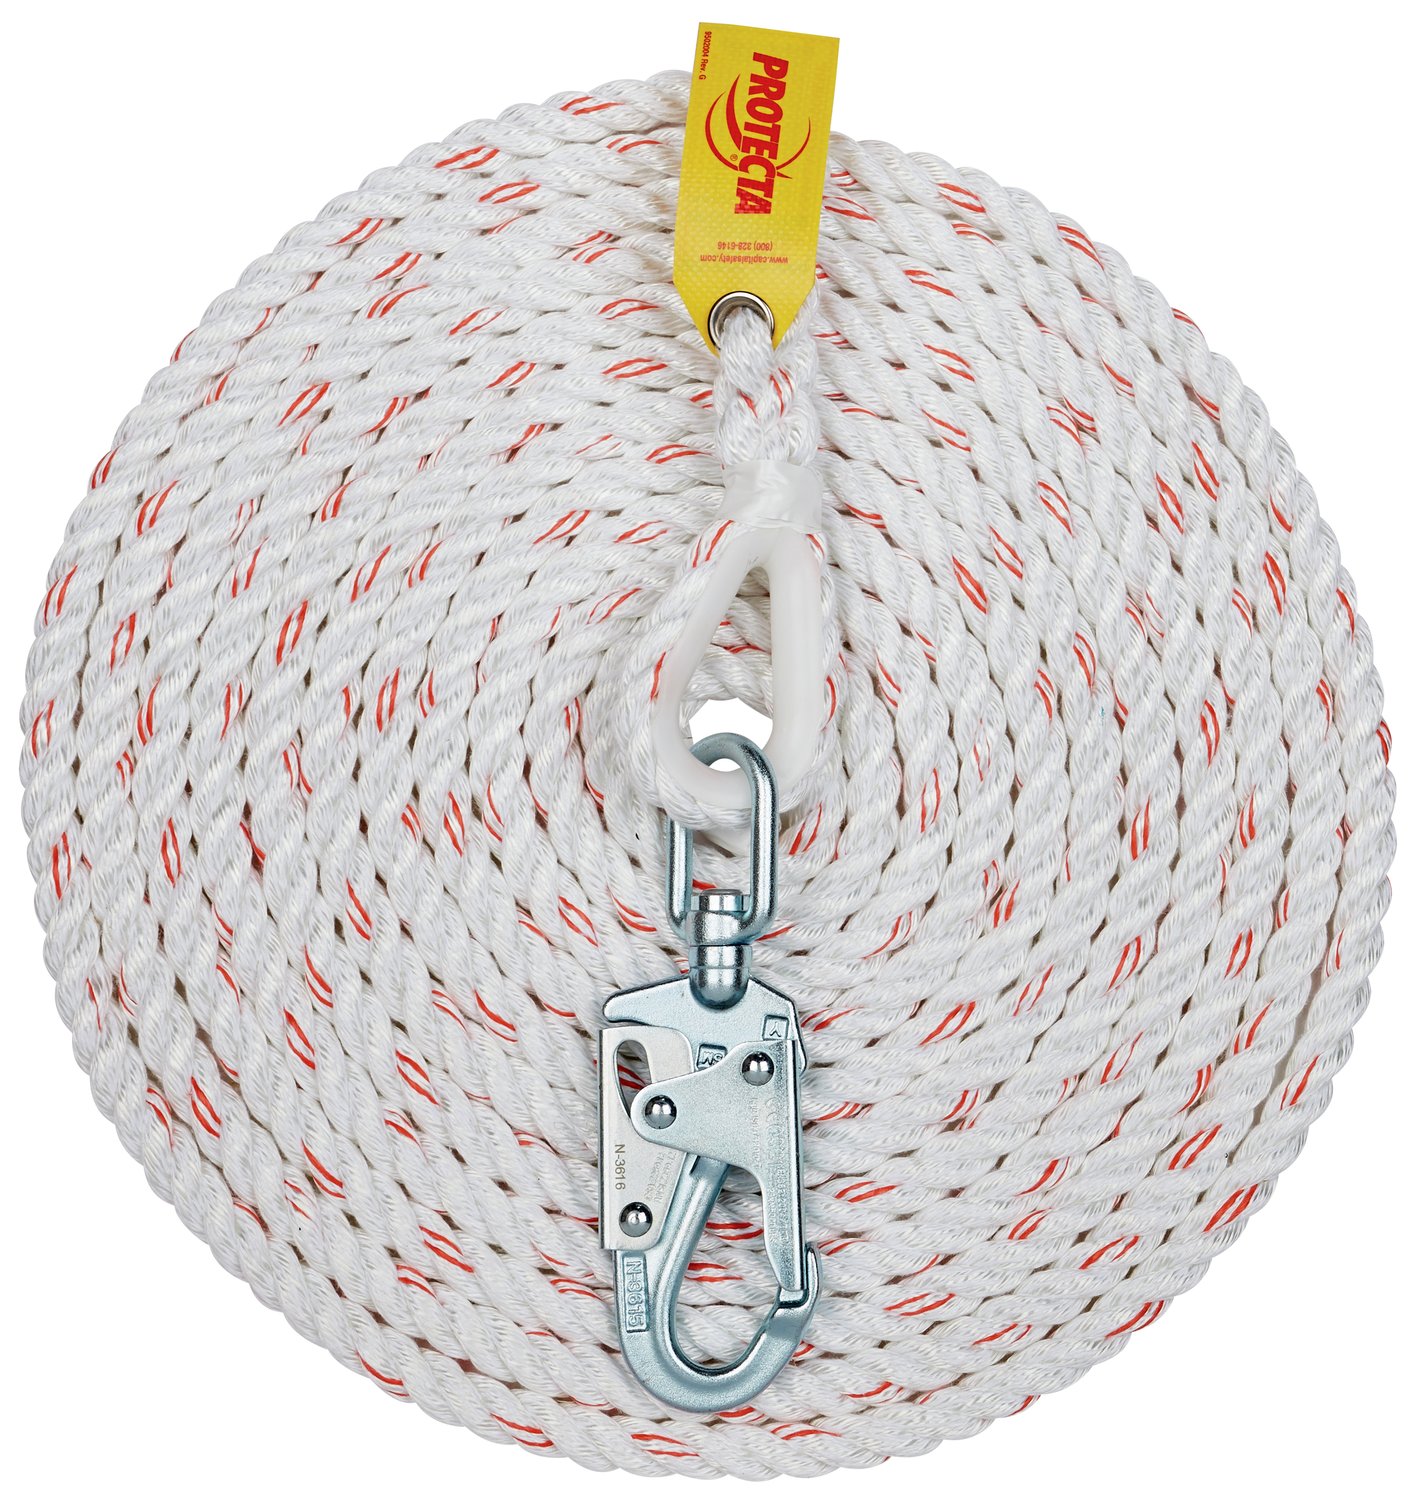 7012817329 - 3M Protecta Rope Lifeline with Swivel Snap Hook 1299991, 5/8 in Polyester and Polypropylene Blend, White, 30 ft